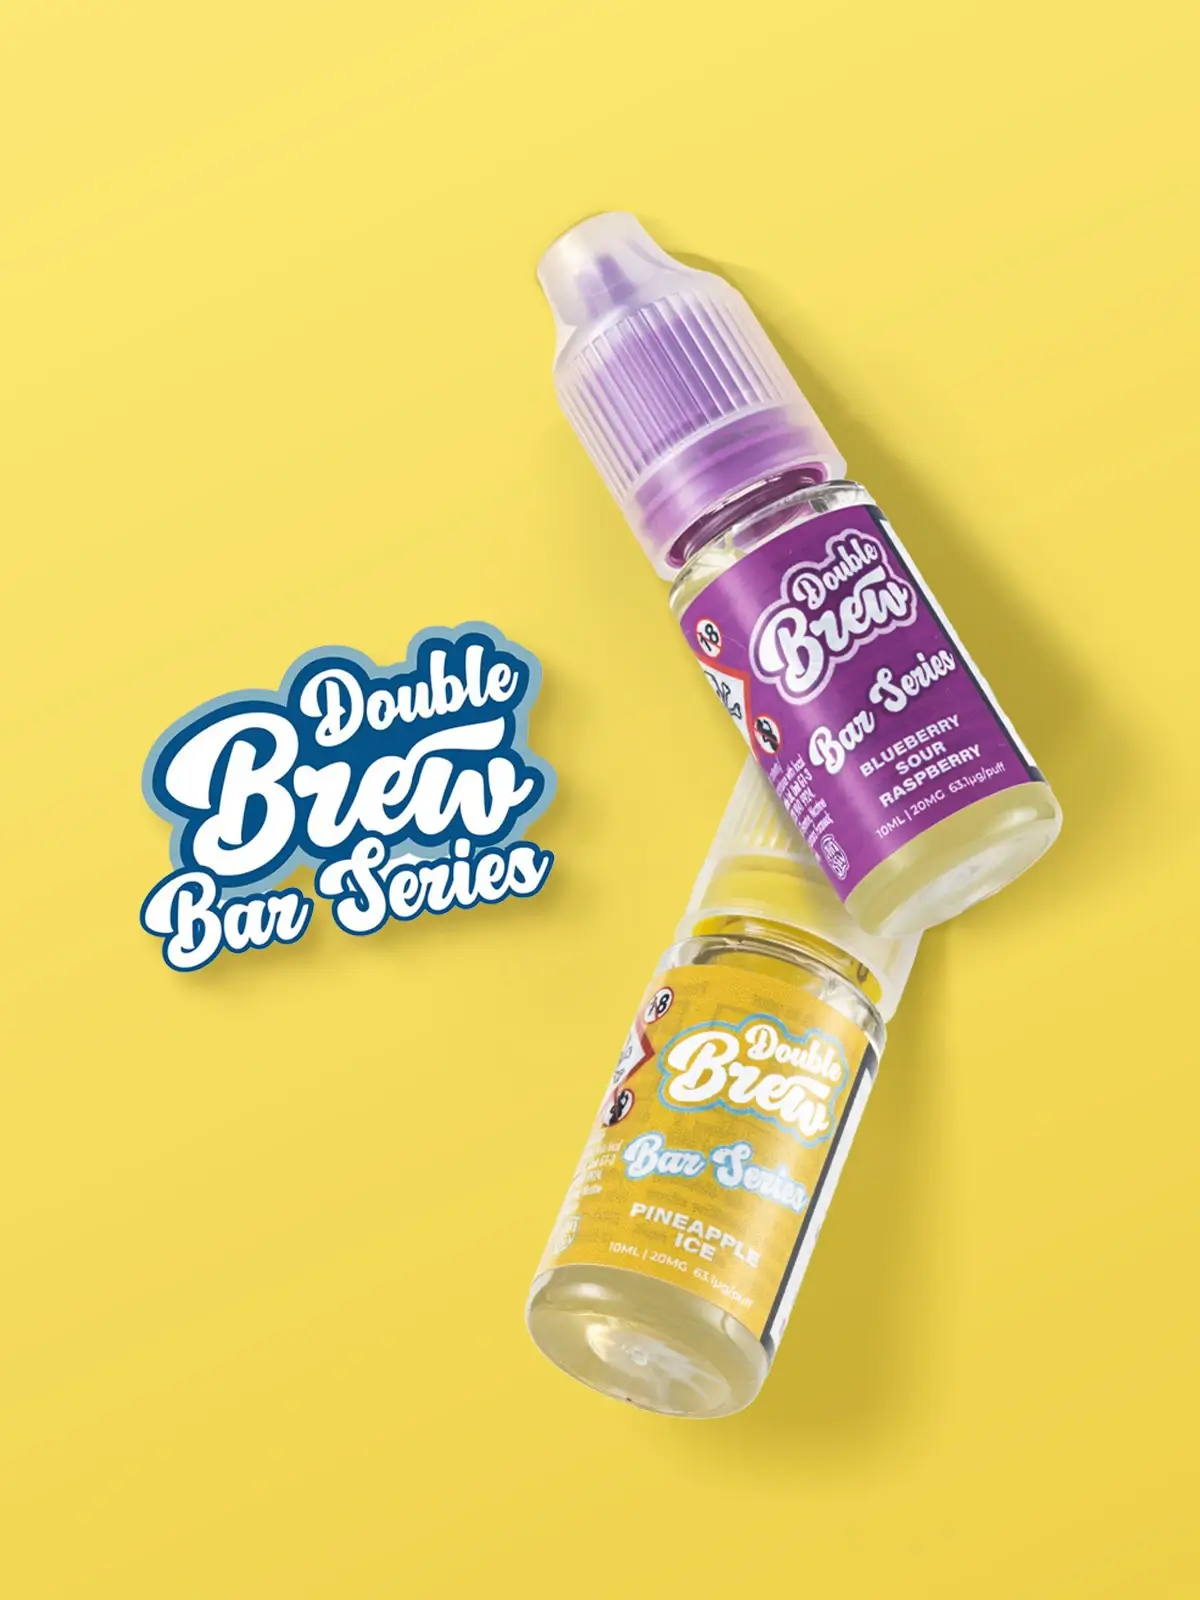 Two bottles of Ohm Brew Double Brew along with the collection's Logo floating in front of a bright yellow background